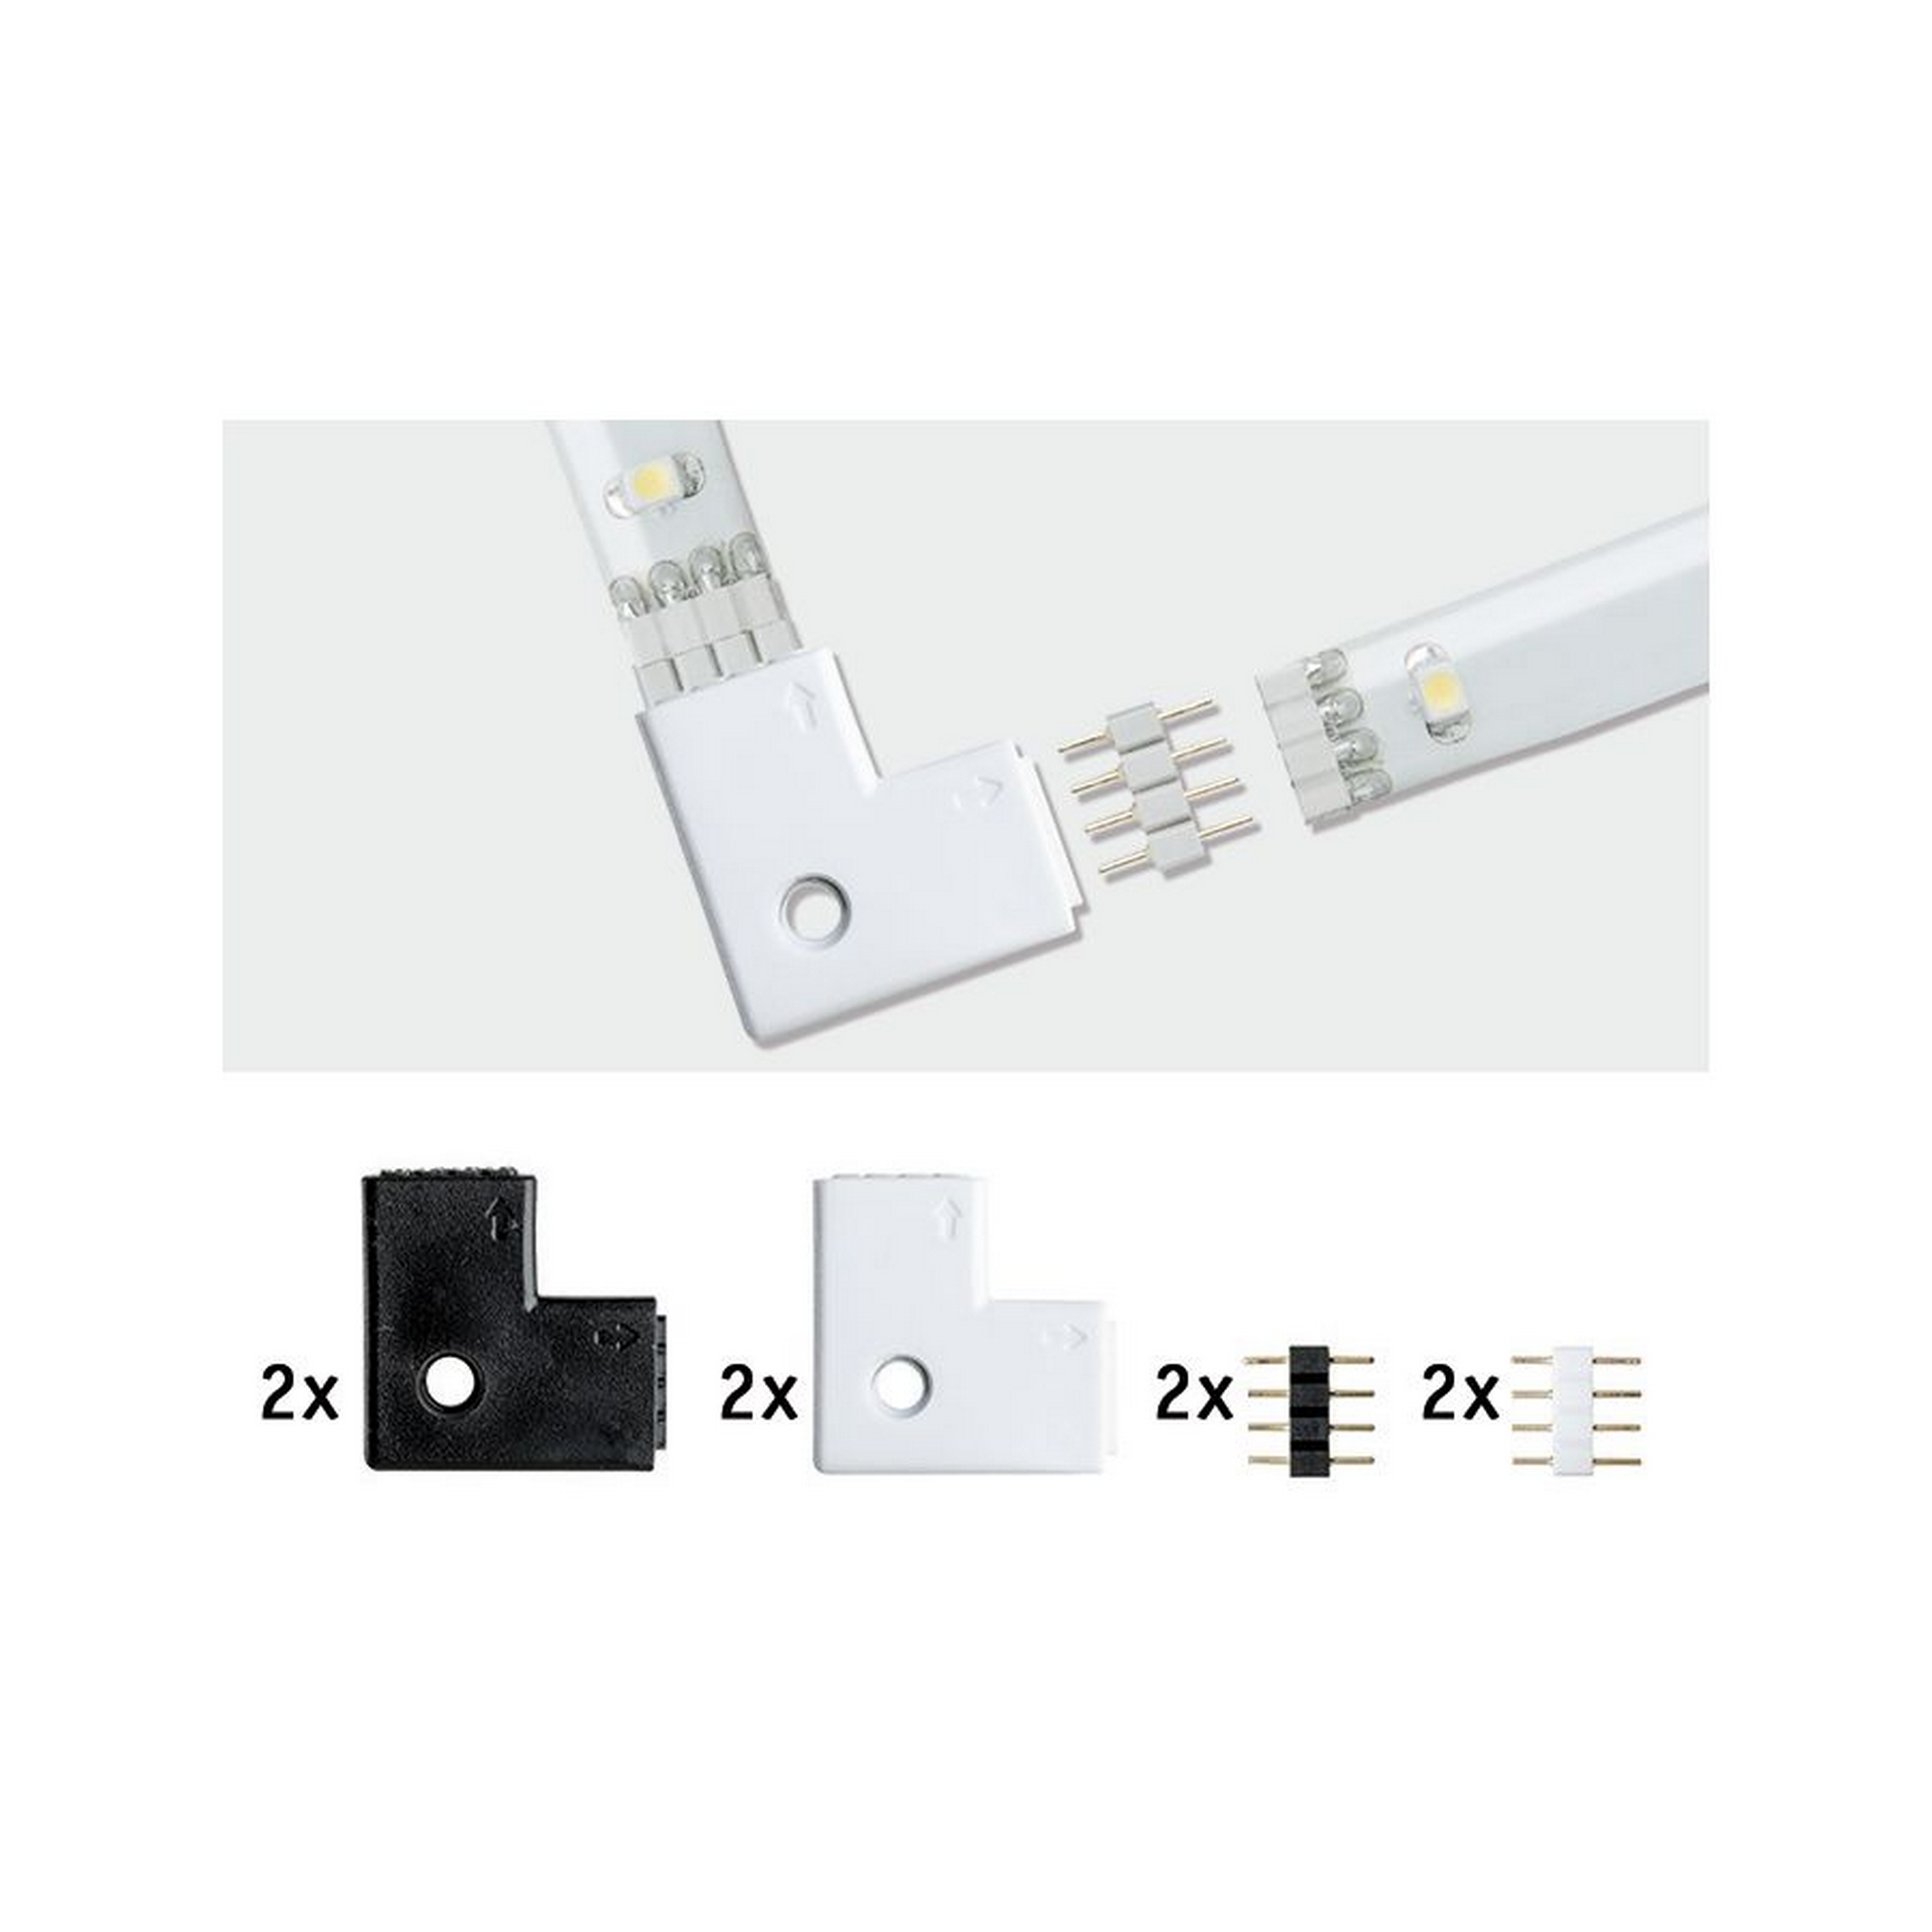 LED-Connector 'YourLED' 90°-Winkel schwarz/weiß 4 Stück + product picture